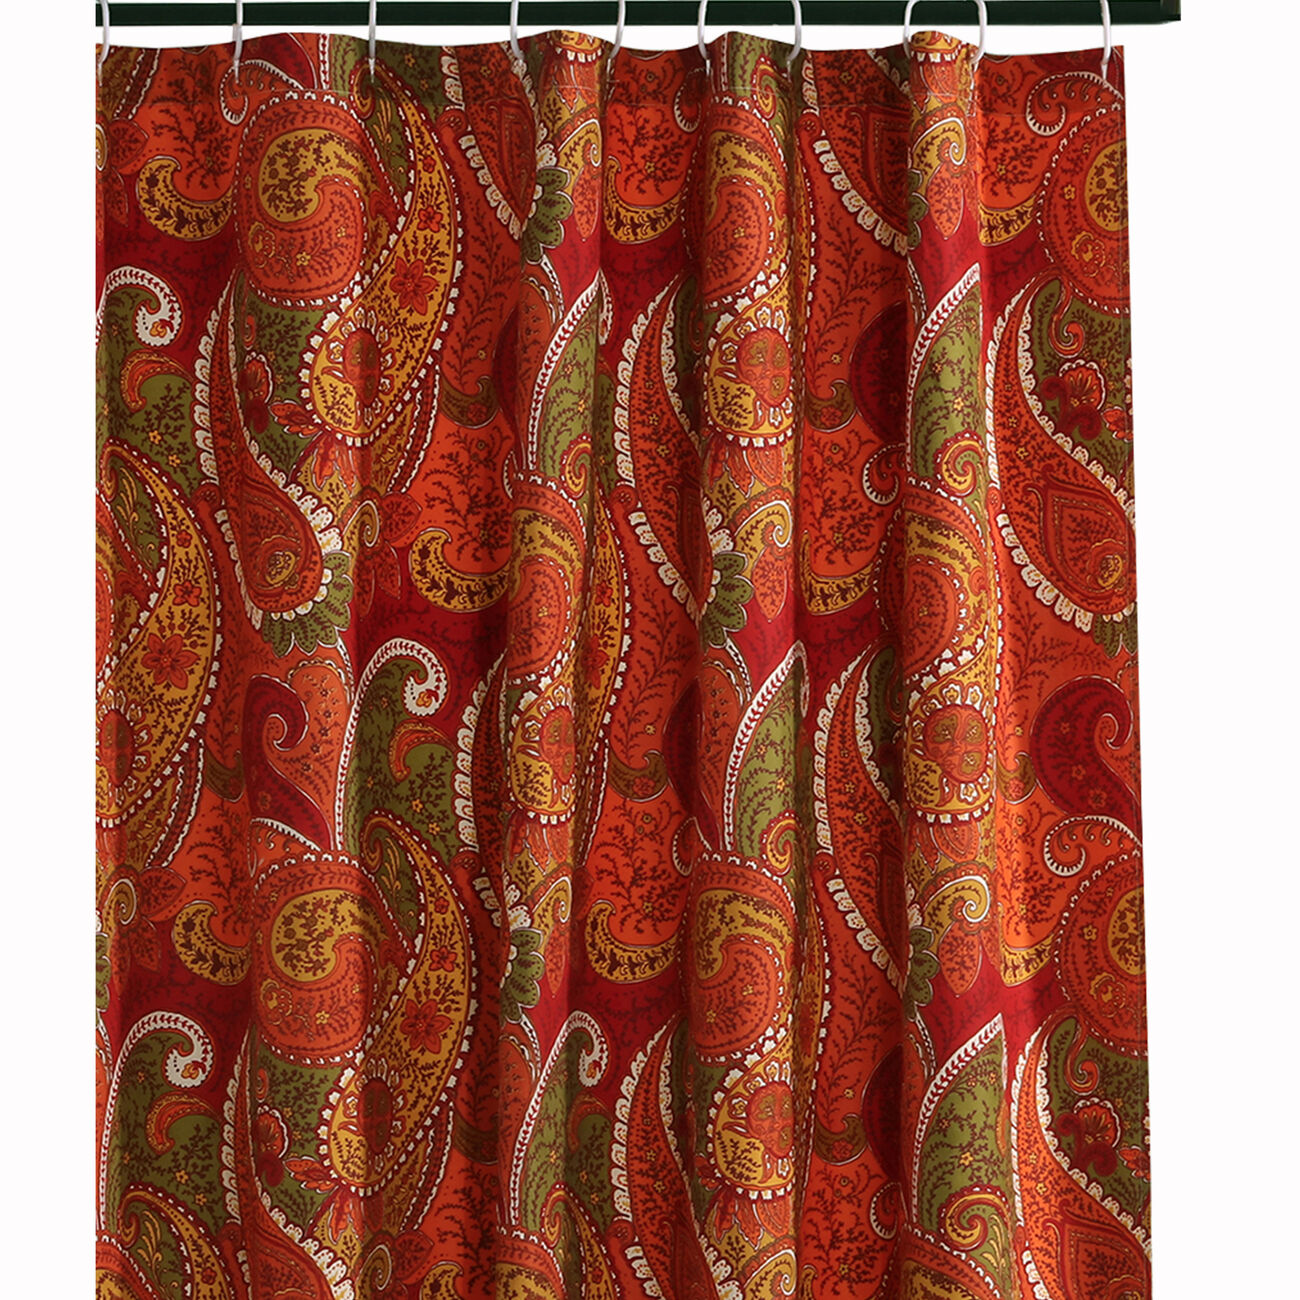 72 x 72 Polyester Shower Curtain with Paisley Print, Cinnamon Red